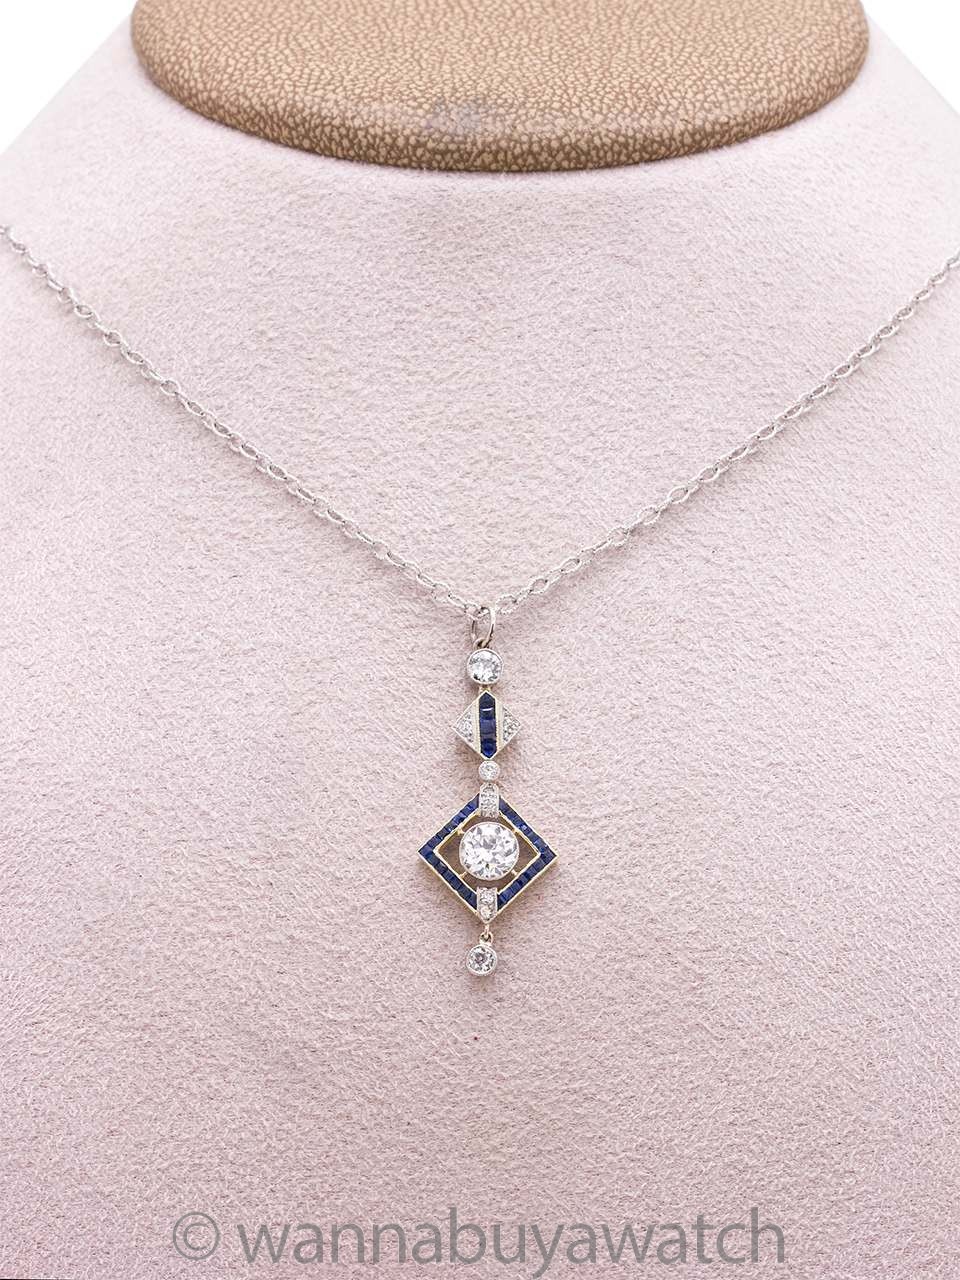 Buy Blue Sapphire Necklace, September Birthstone Necklace, Sapphire  Necklace Vintage, Sapphire Pendant Necklace, Sapphire Tennis Necklace  Online in India - Etsy